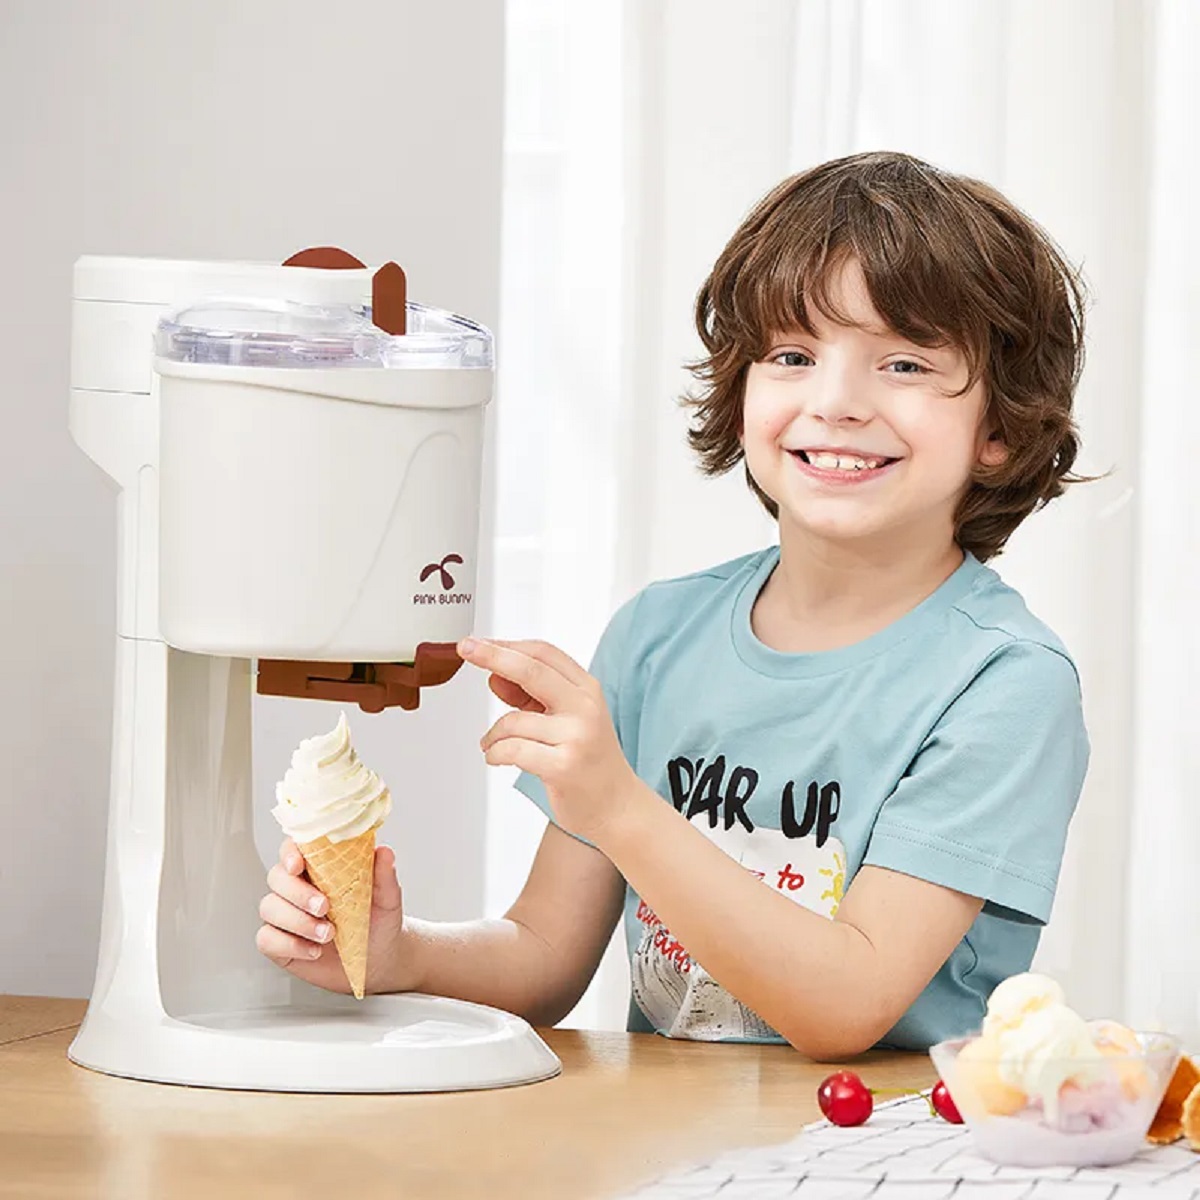 what-store-sells-soft-serve-ice-cream-maker-for-the-home